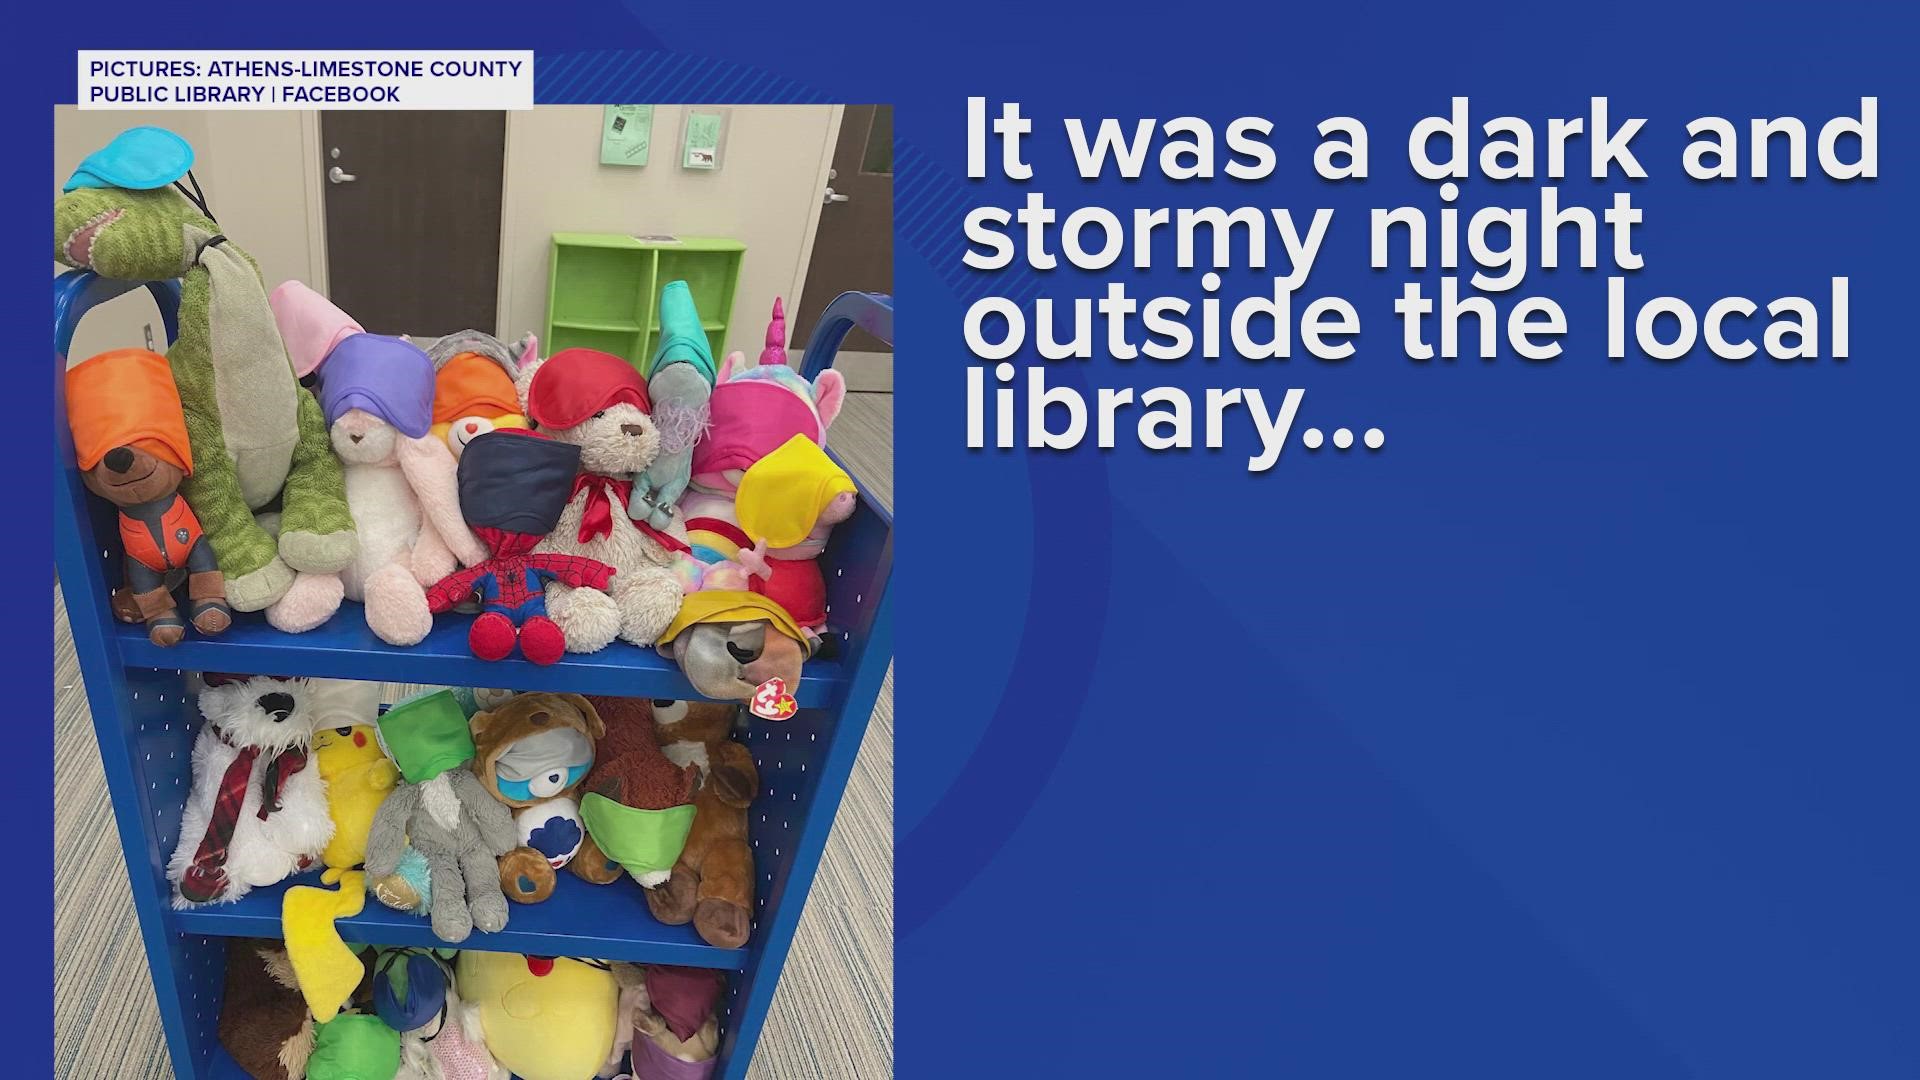 The stuffed animals of the Athens-Limestone County Public Library had a special sleepover.